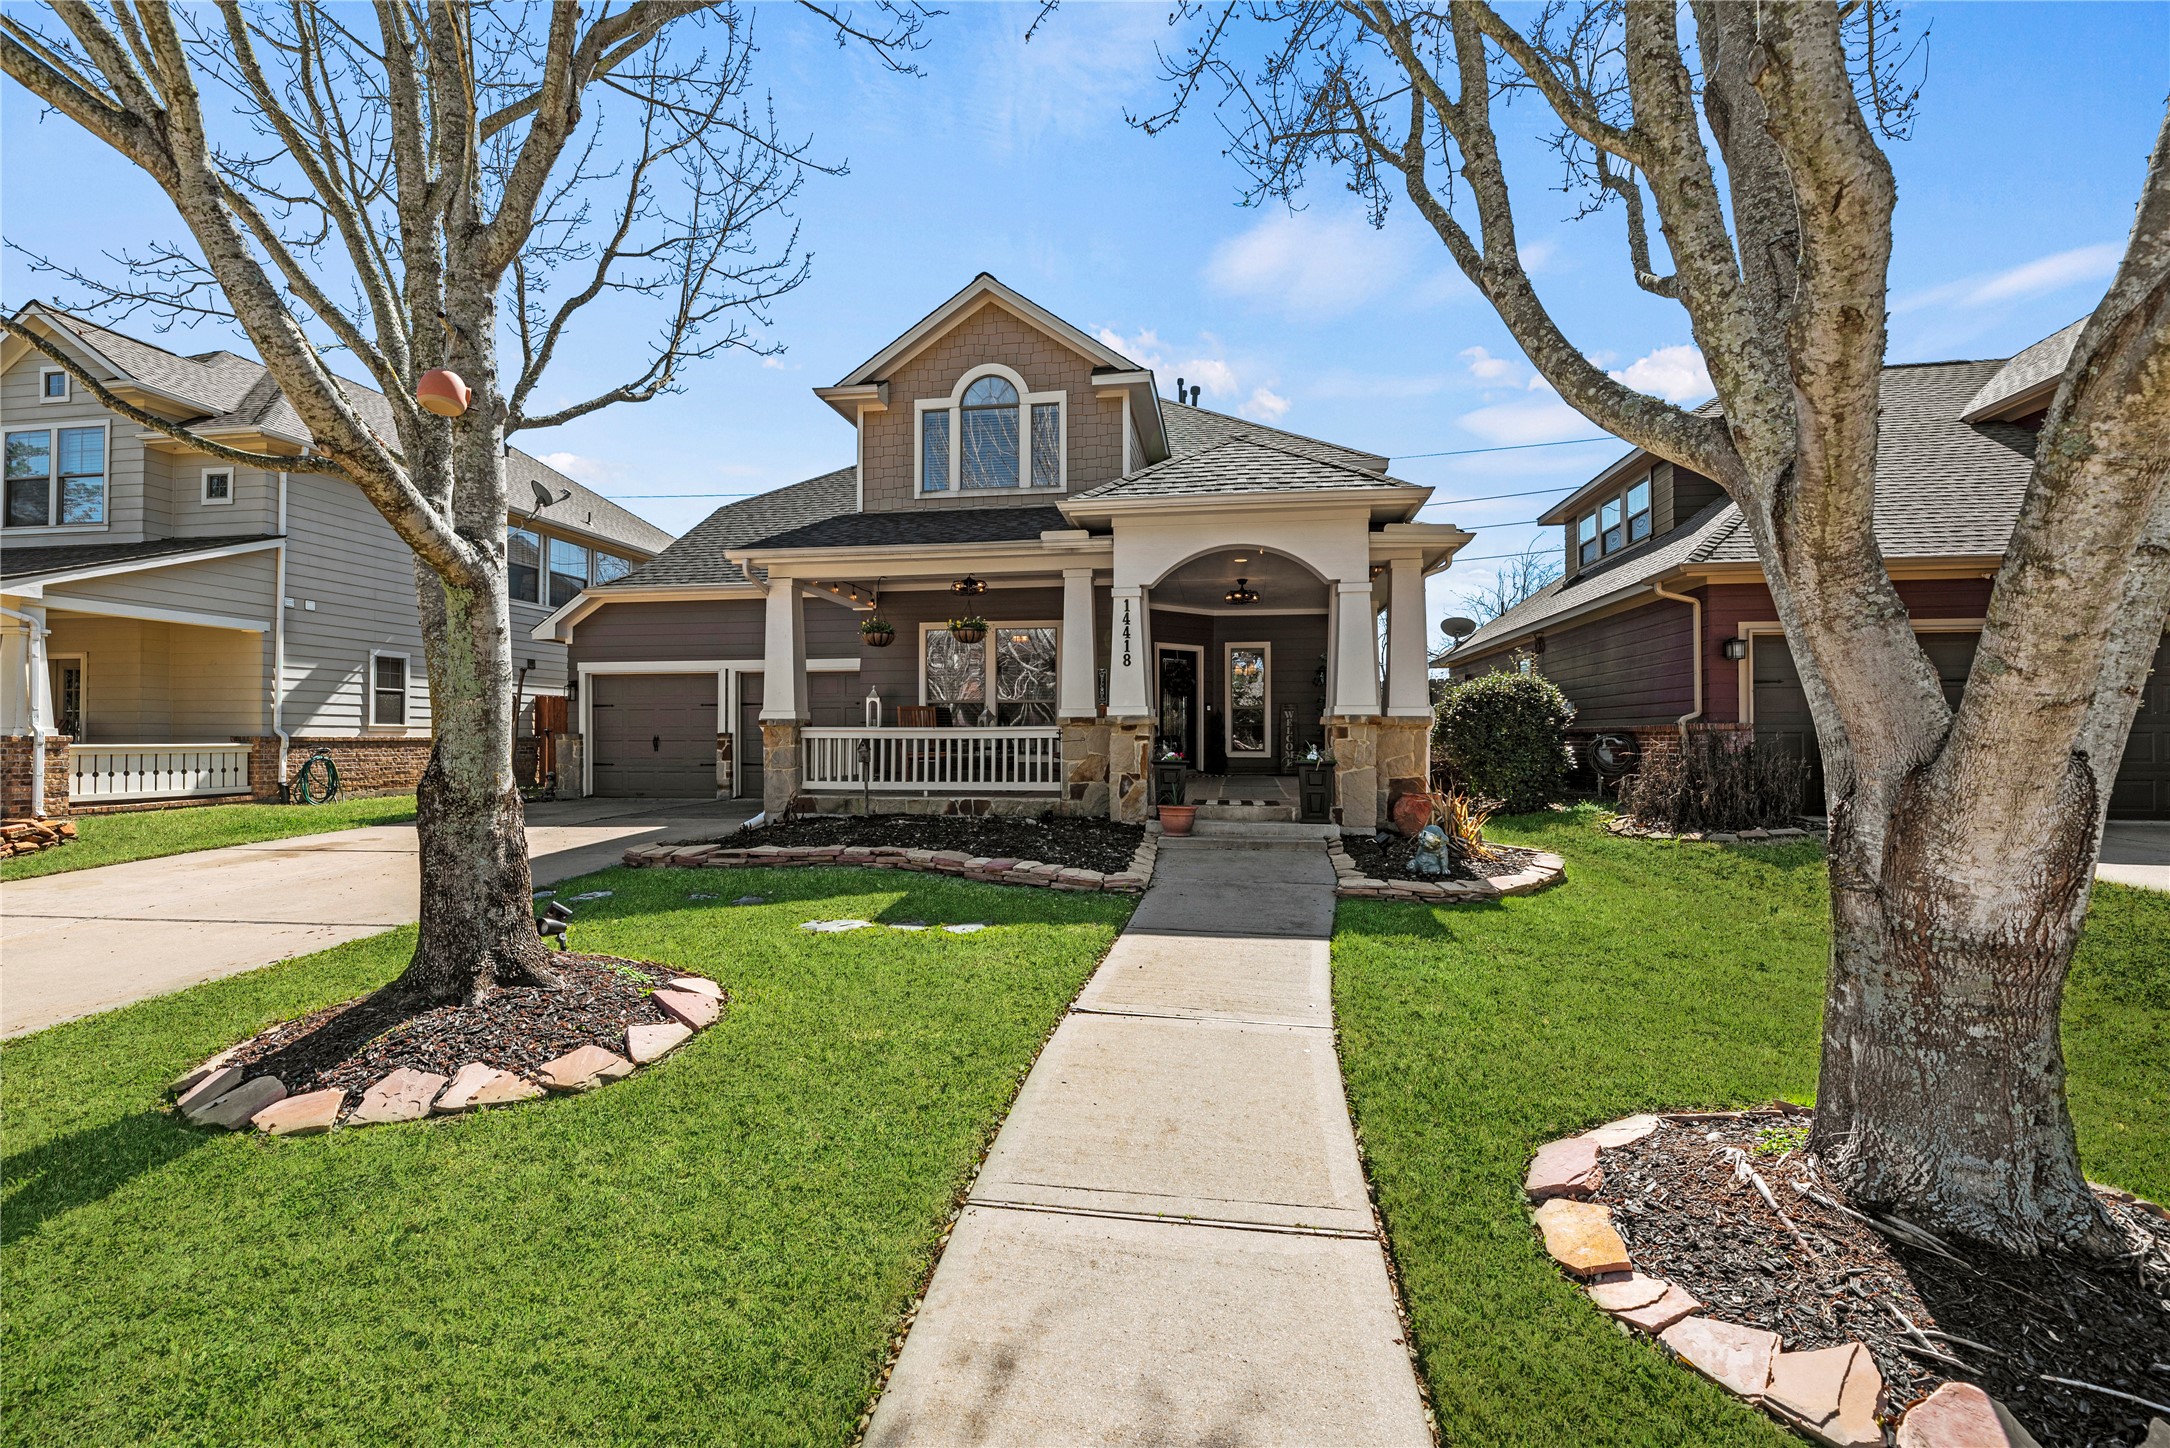 Cypress 2-story, 4-bed 14418 Gleaming Rose Drive-idx